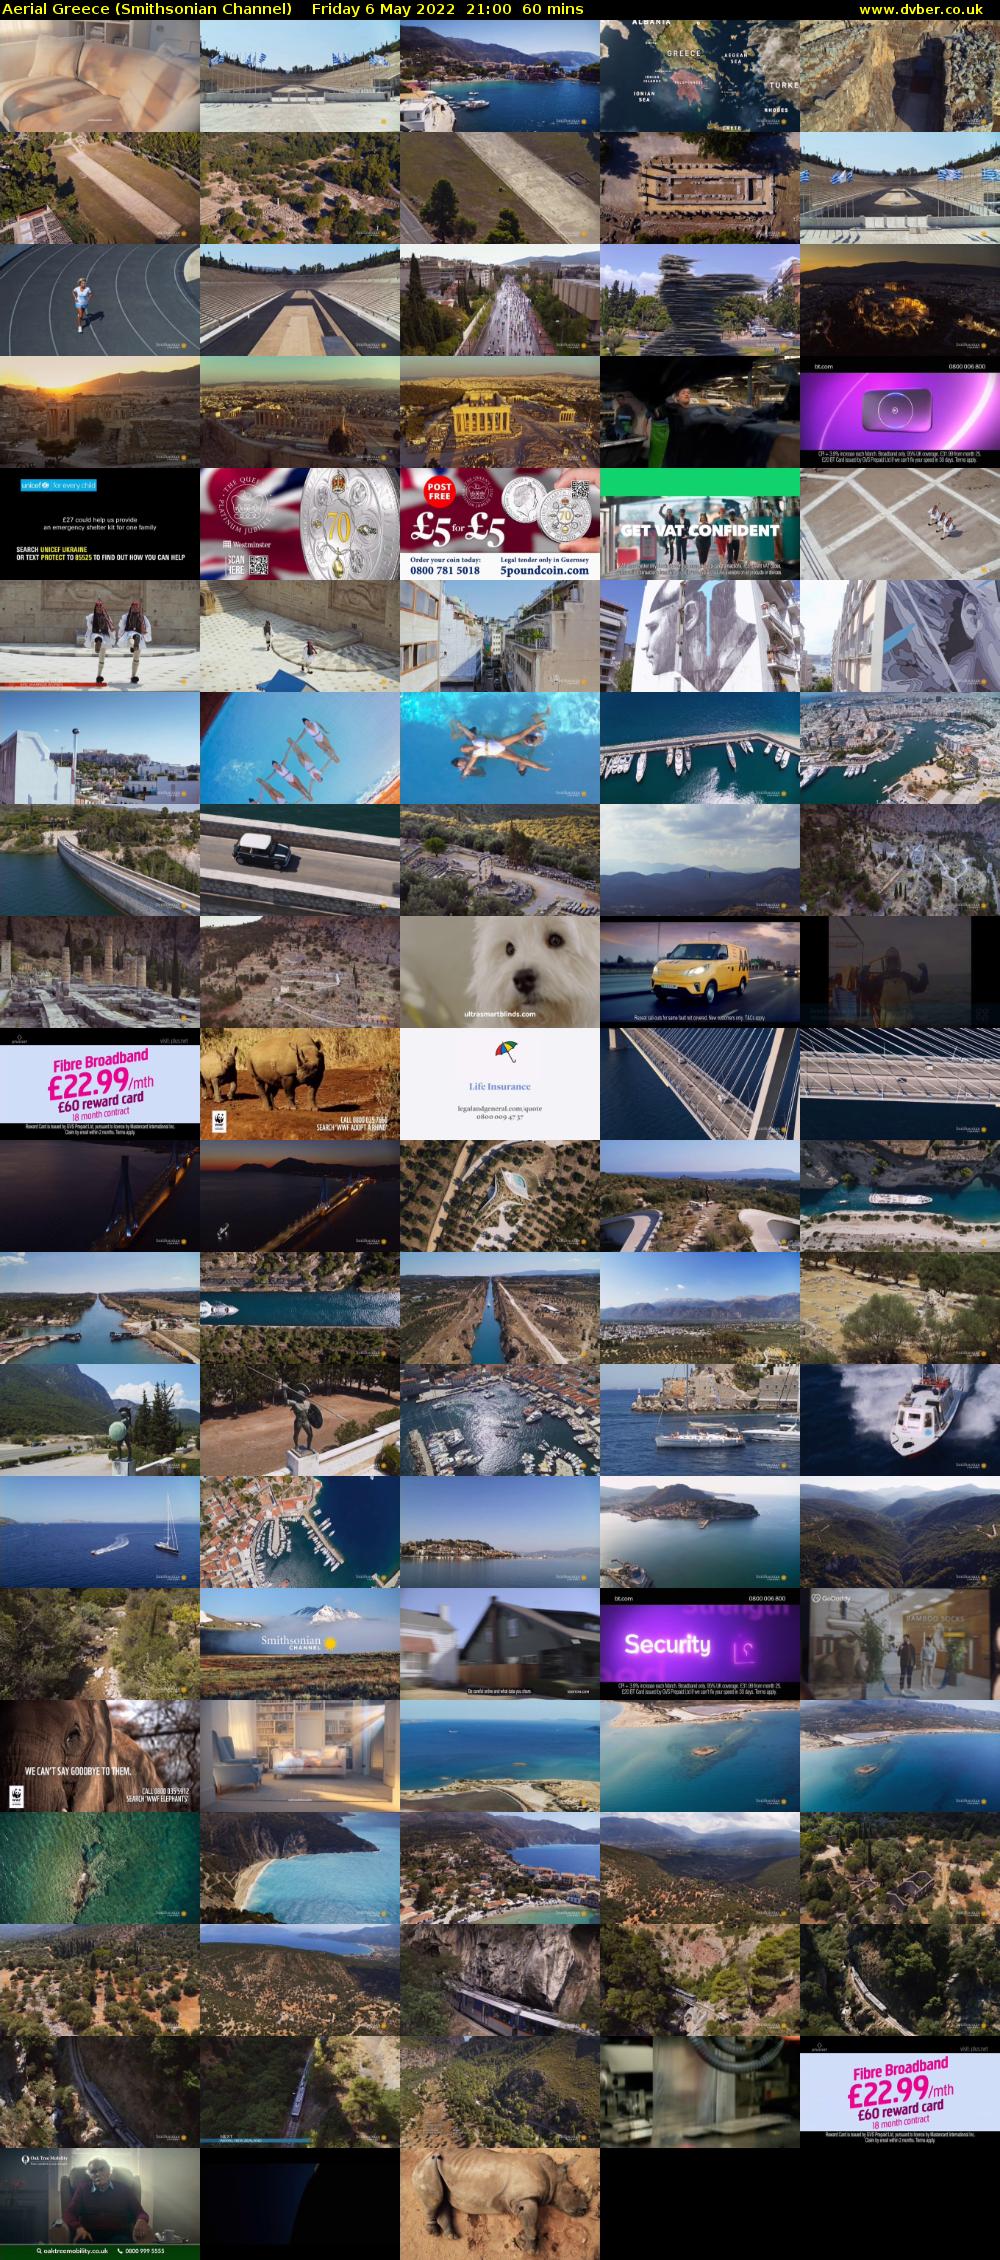 Aerial Greece (Smithsonian Channel) Friday 6 May 2022 21:00 - 22:00